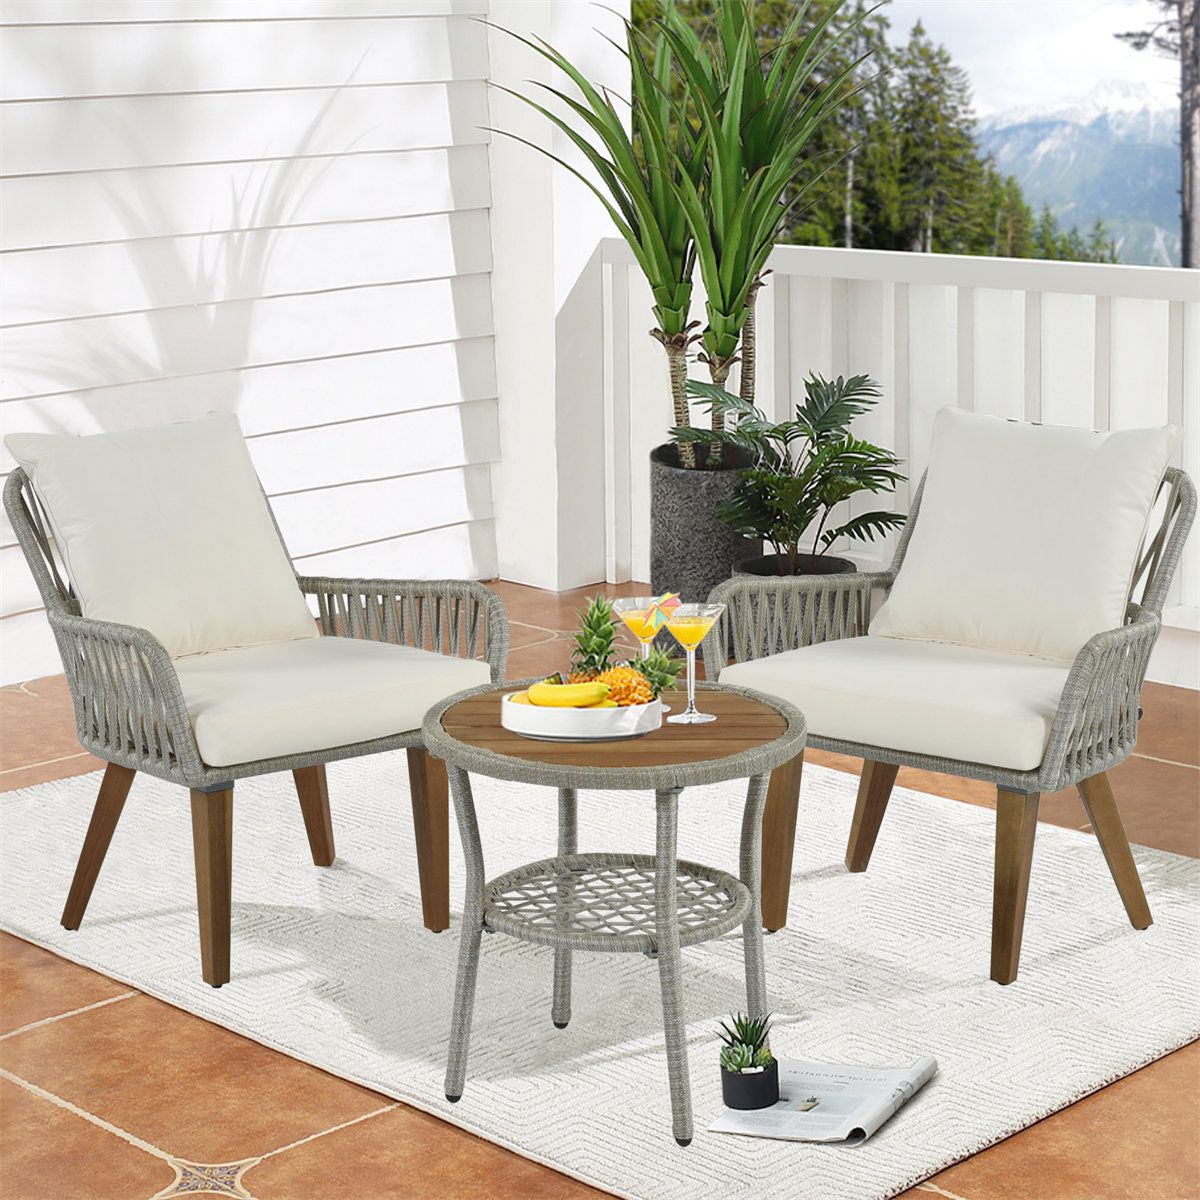 Current Woven Rope Outdoor 3 Piece Conversation Set In Corrigan Studio® 3 Piece Bistro Set Woven Rope Conversation Set, Wood  Tabletop And Cushions Gray Rope+beige Fabric (View 4 of 15)